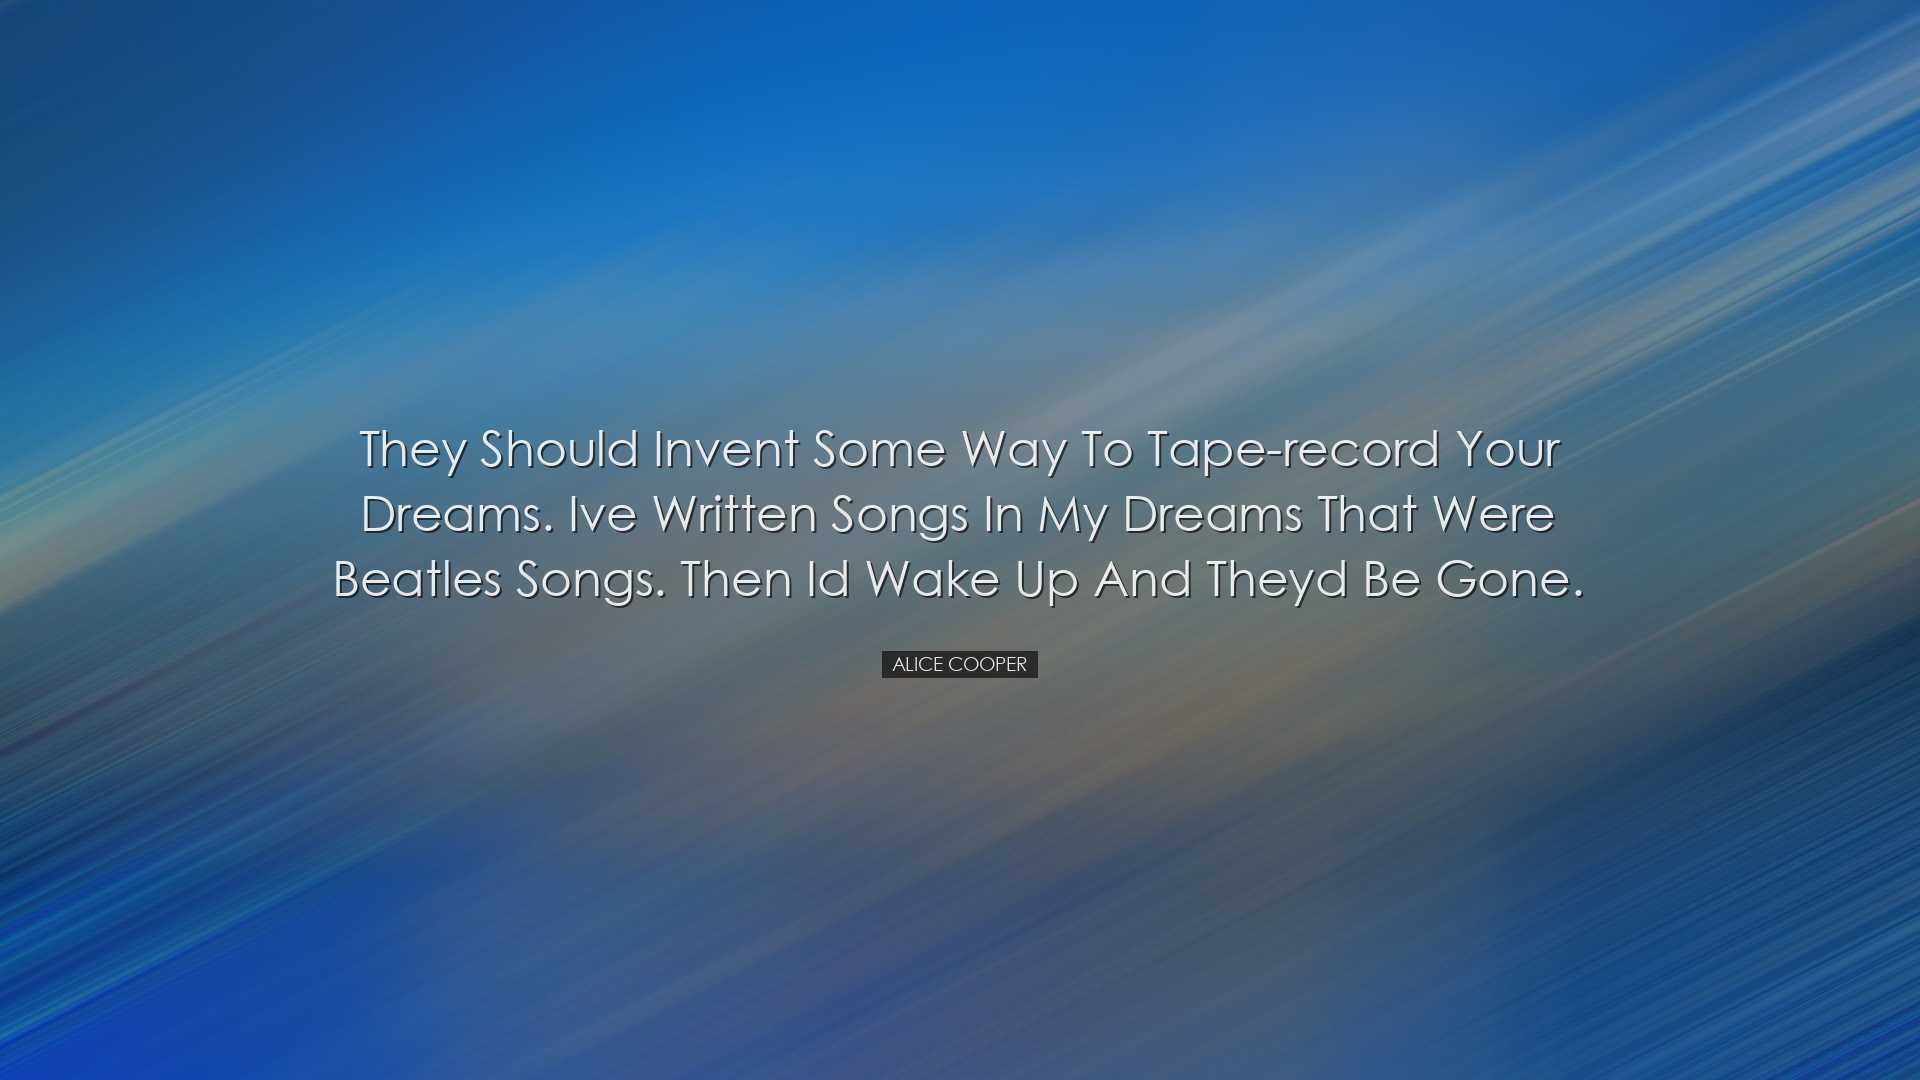 They should invent some way to tape-record your dreams. Ive writte